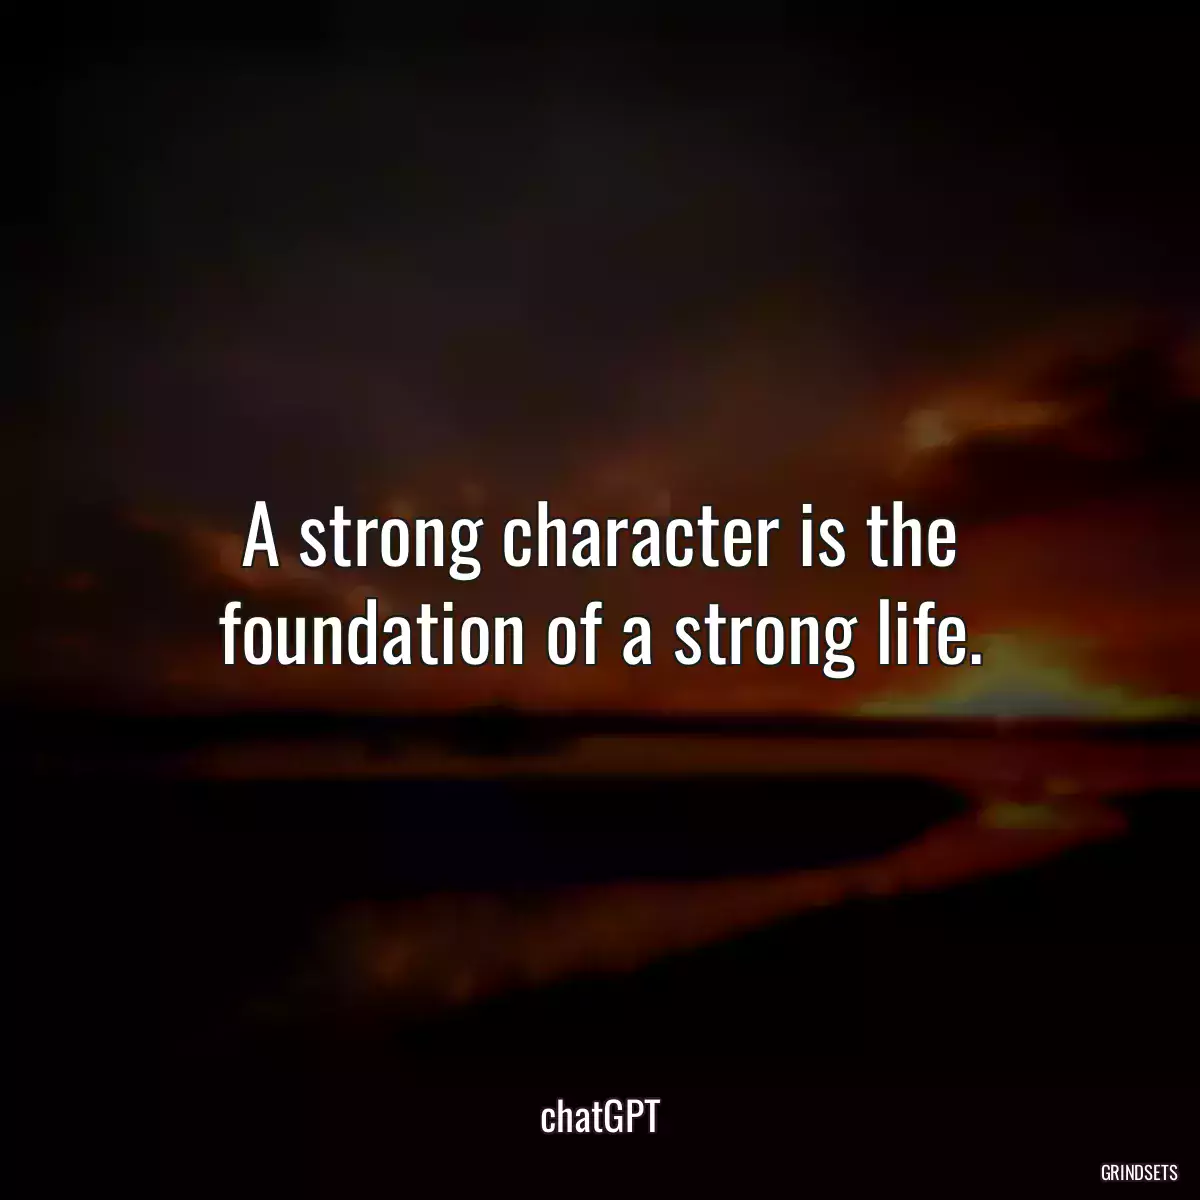 A strong character is the foundation of a strong life.